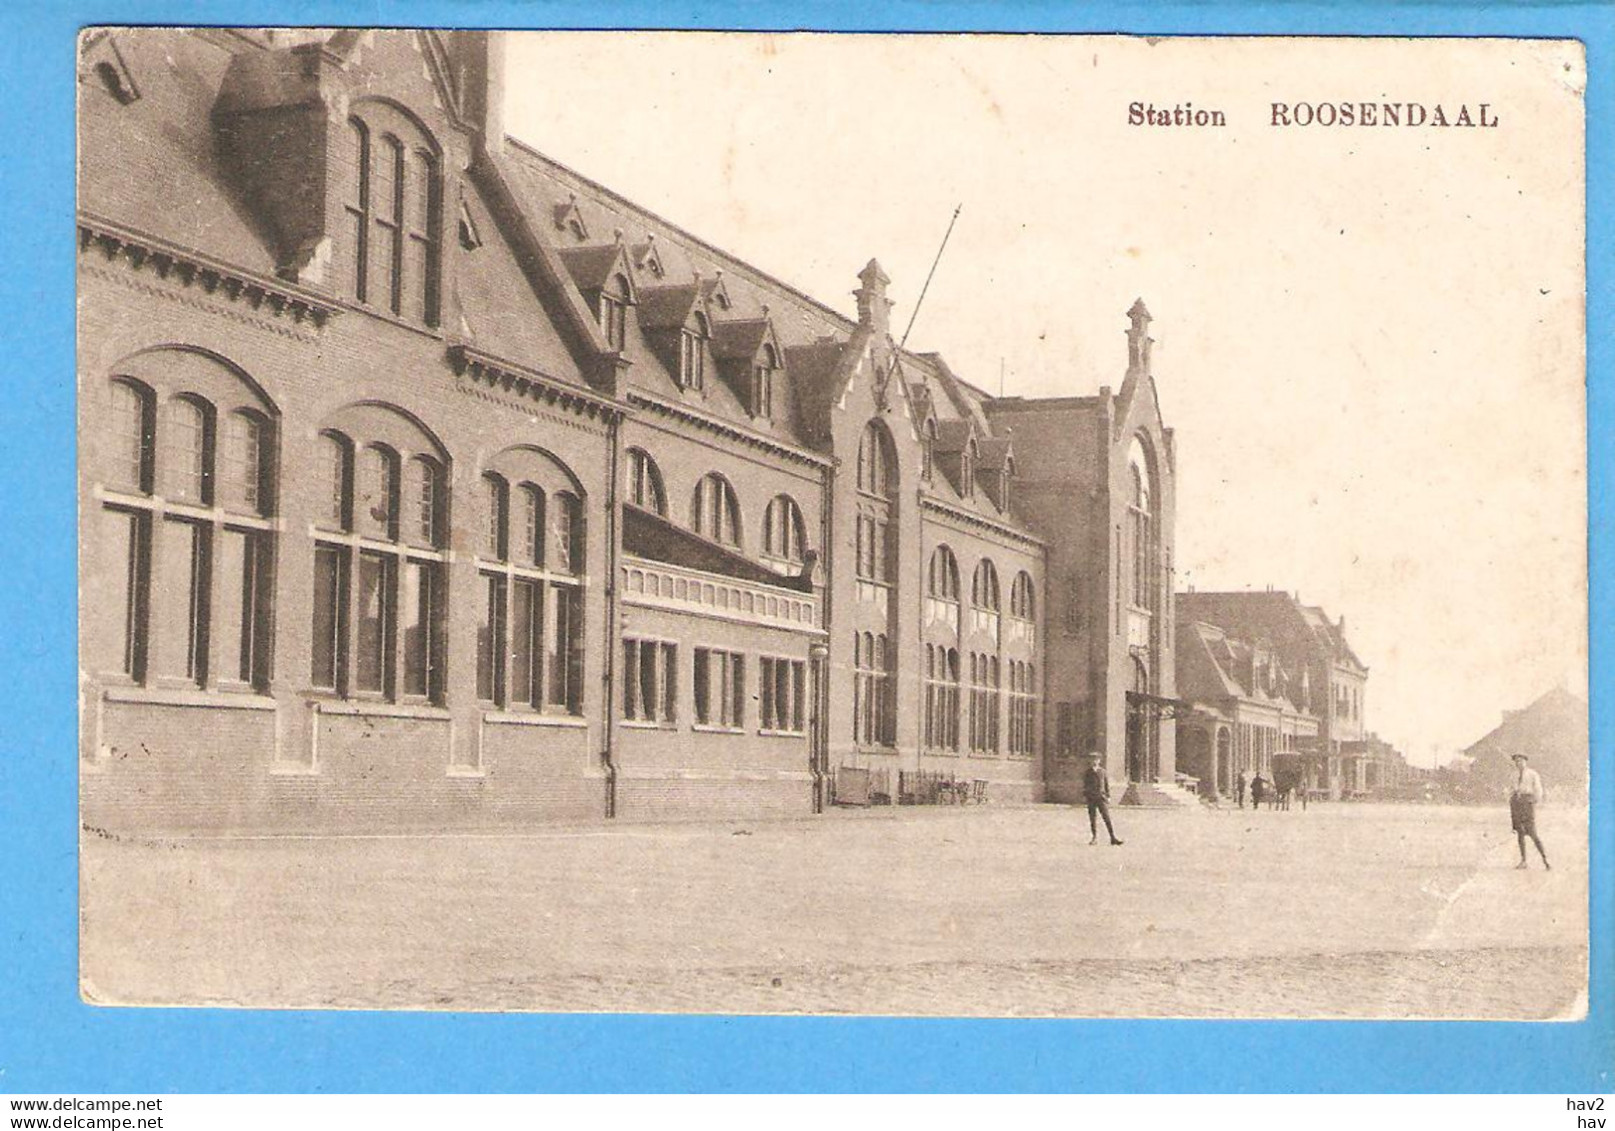 Roosendaal Station 1916 RY52793 - Roosendaal